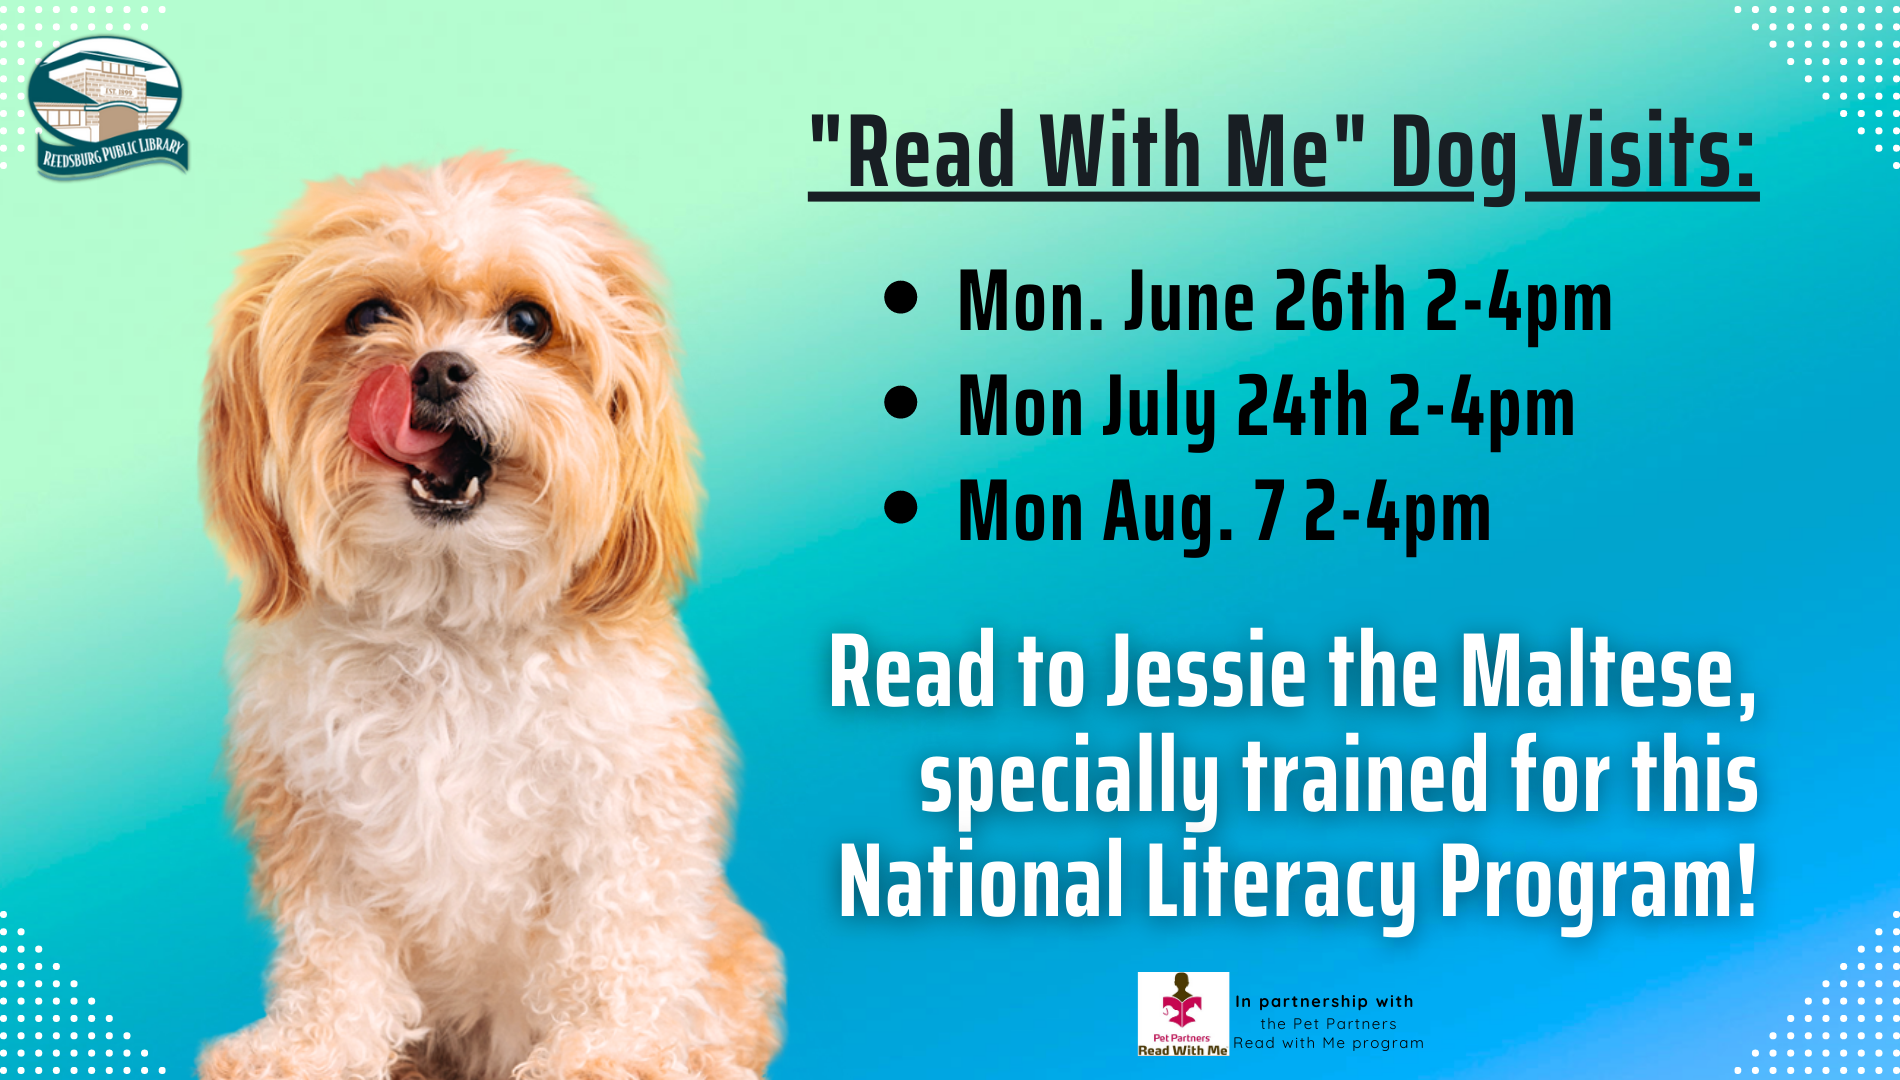 Jessie the Maltese is this year's Read With Me dog!